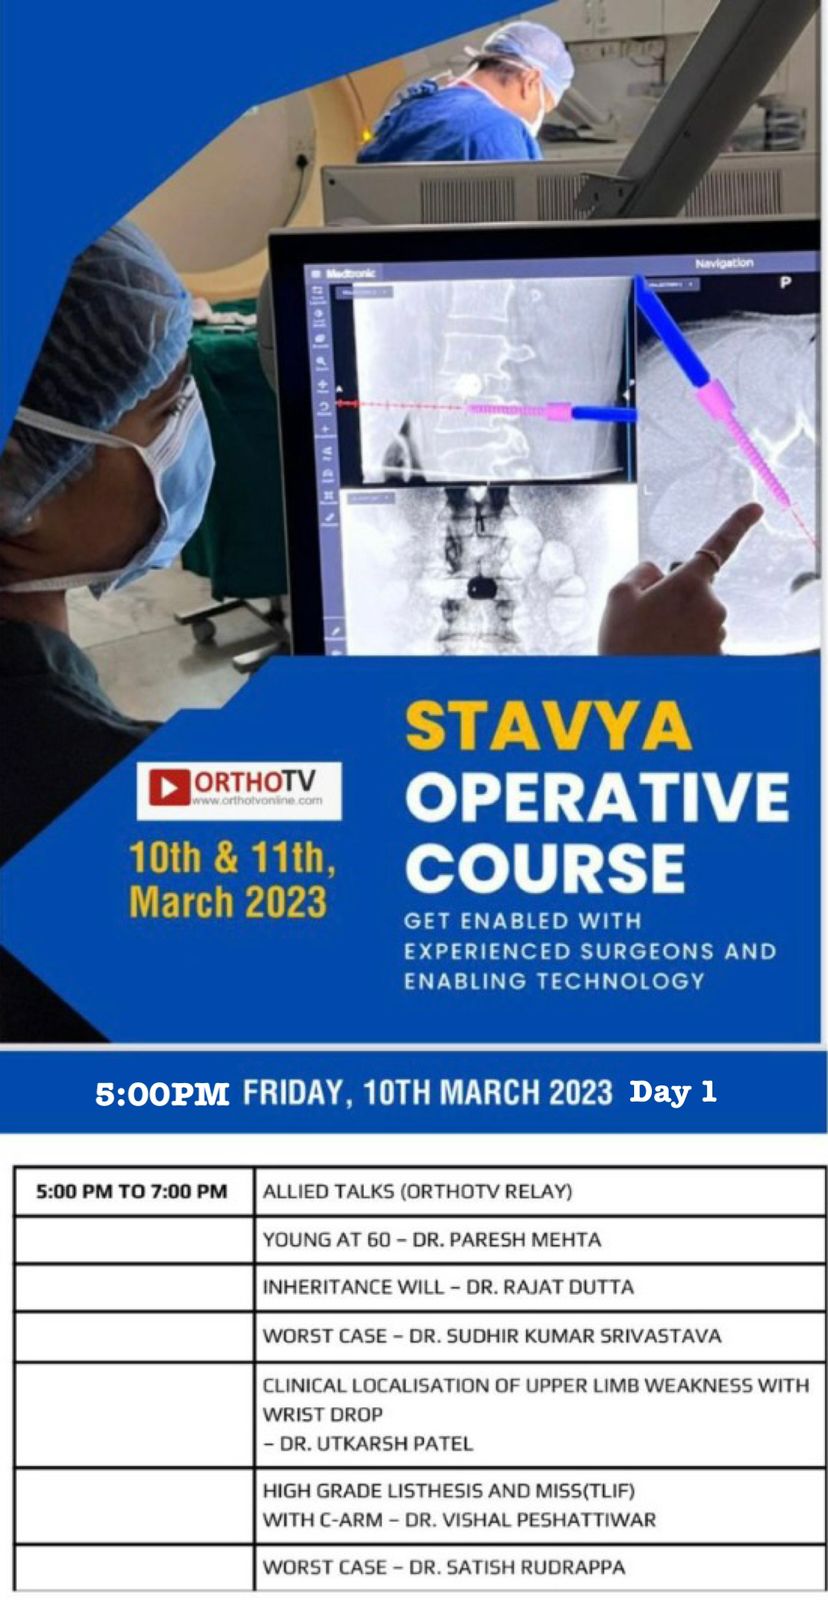 STAVYA GET ENABLED WITH EXPERIENCED SURGEONS AND ENABLING TECHNOLOGY DR. S K SHRIVASTAVA, AMIT JHALA